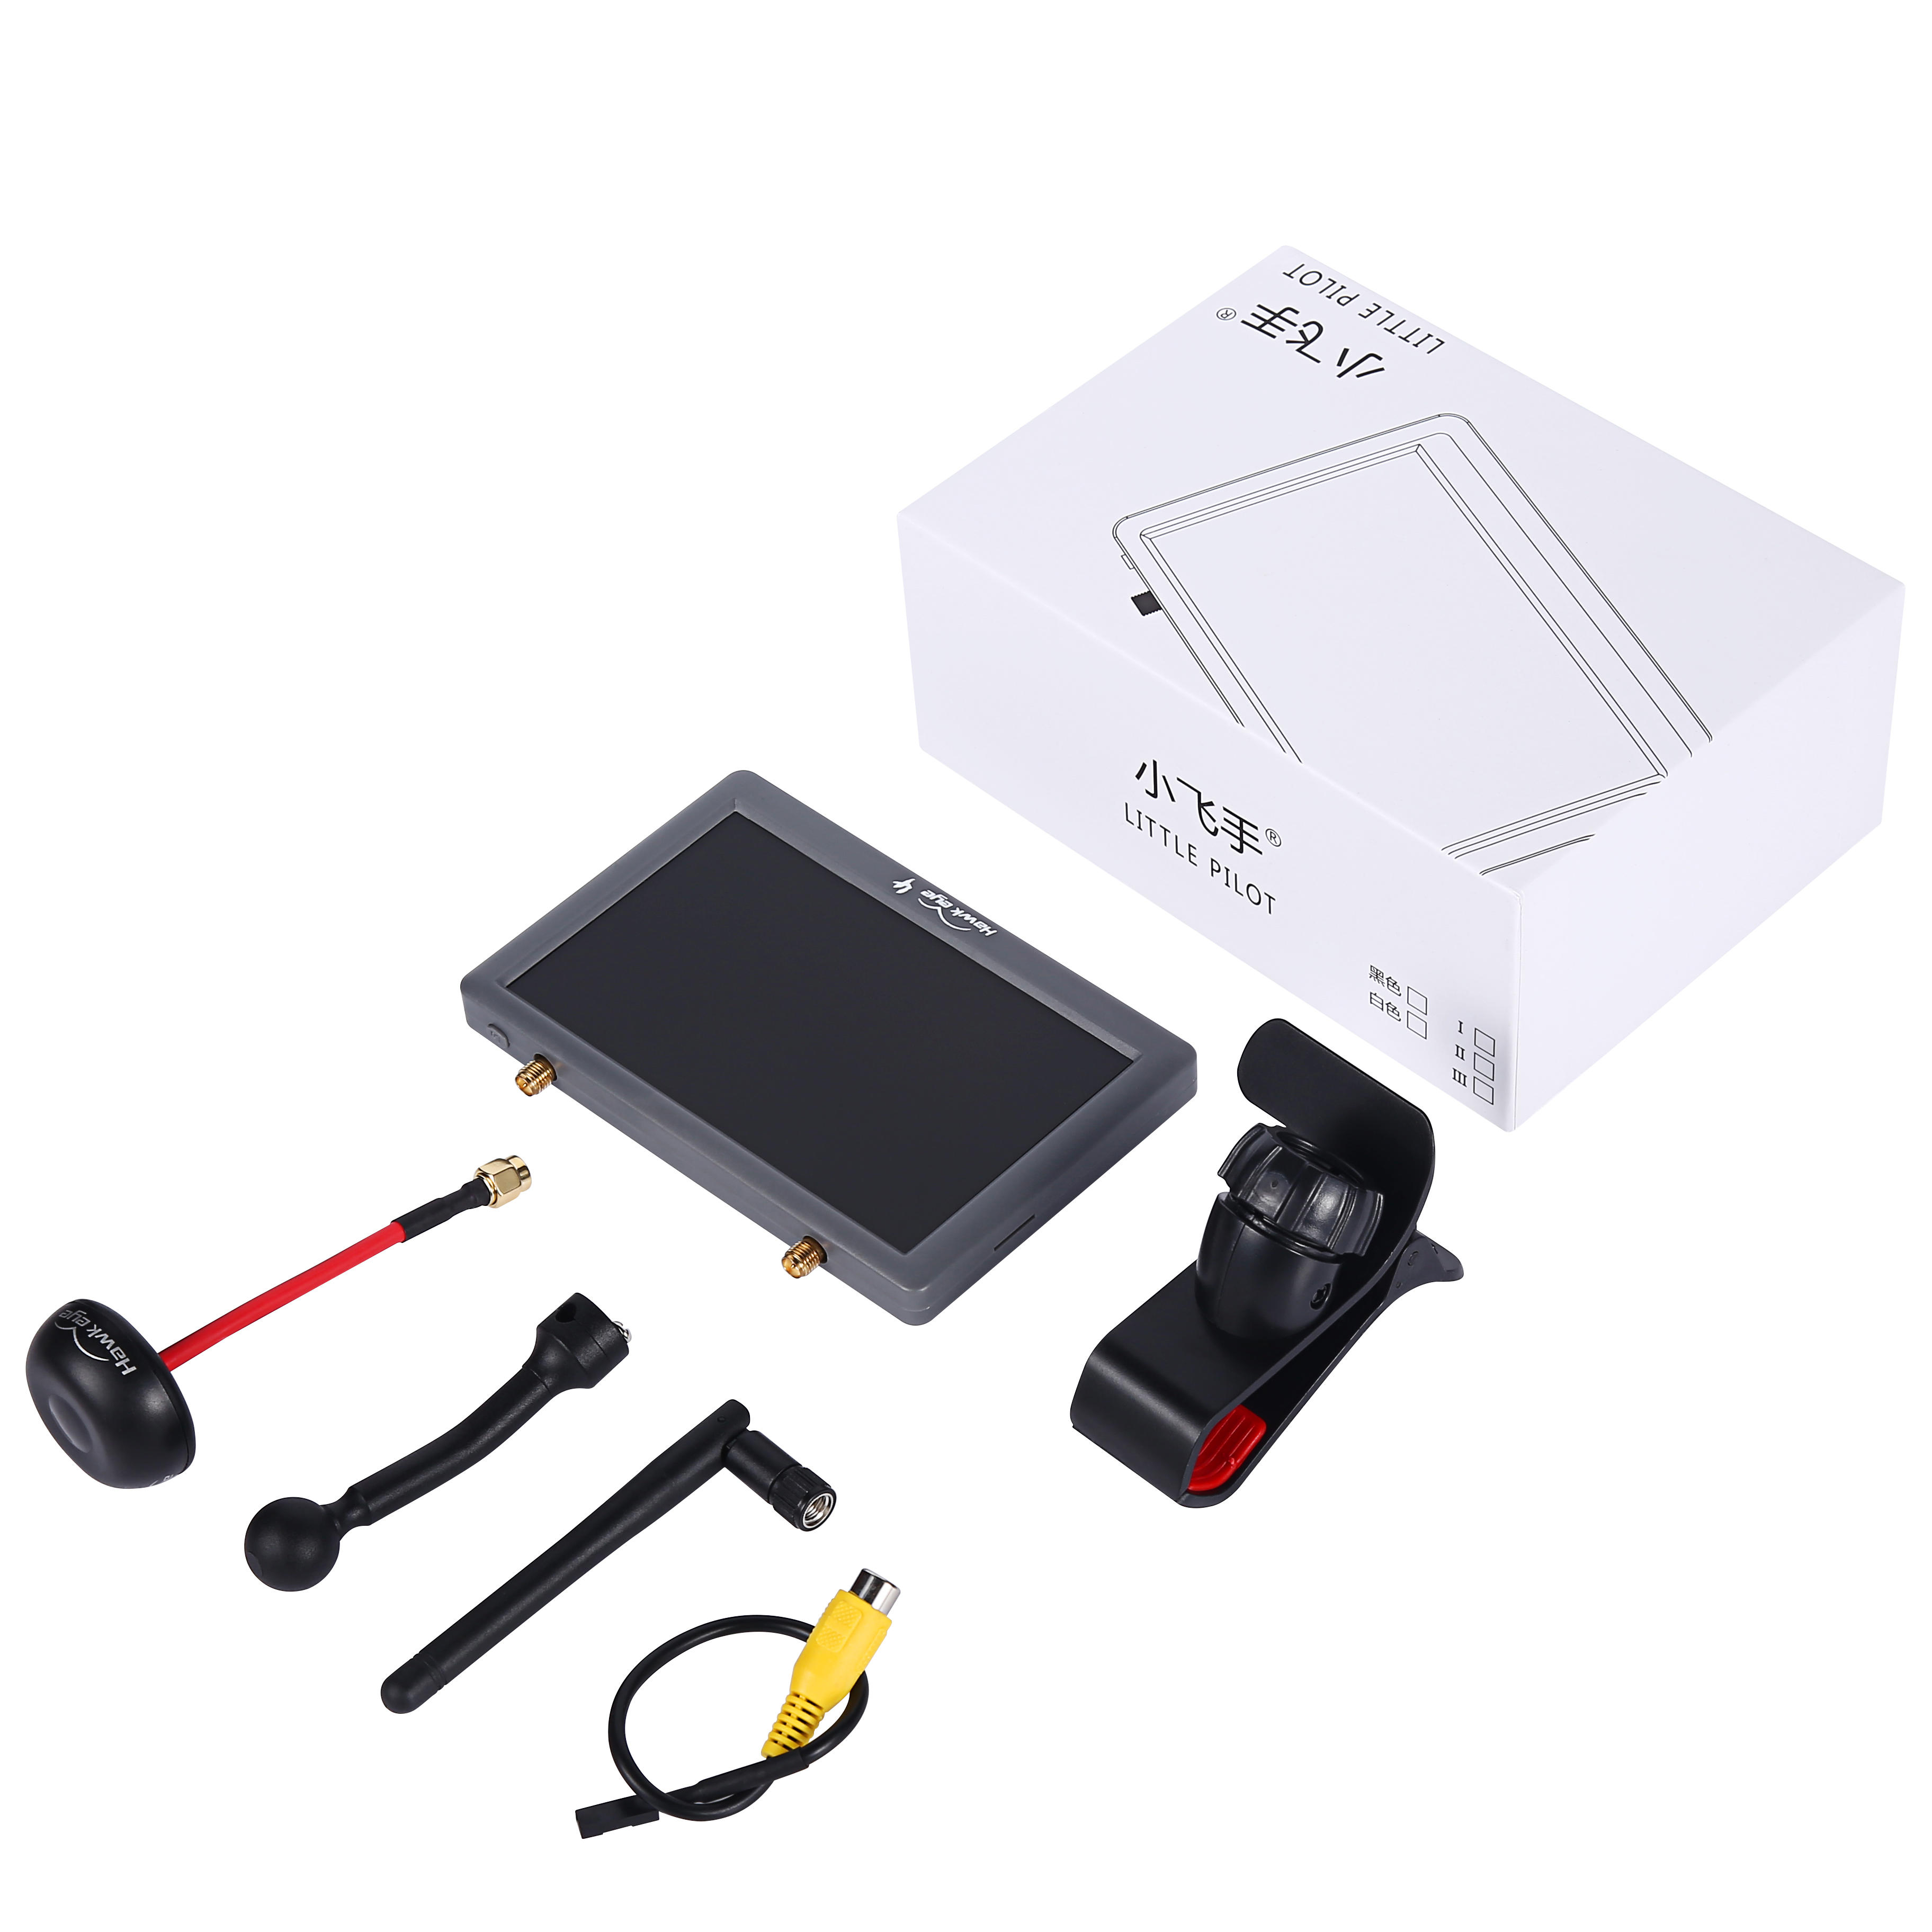 Hawkeye Little Pilot IV 4 Built in DVR 800*480 5 inch Display 5.8G 48CH Diversity Dual Receiver FPV HD Monitor for RC Dr